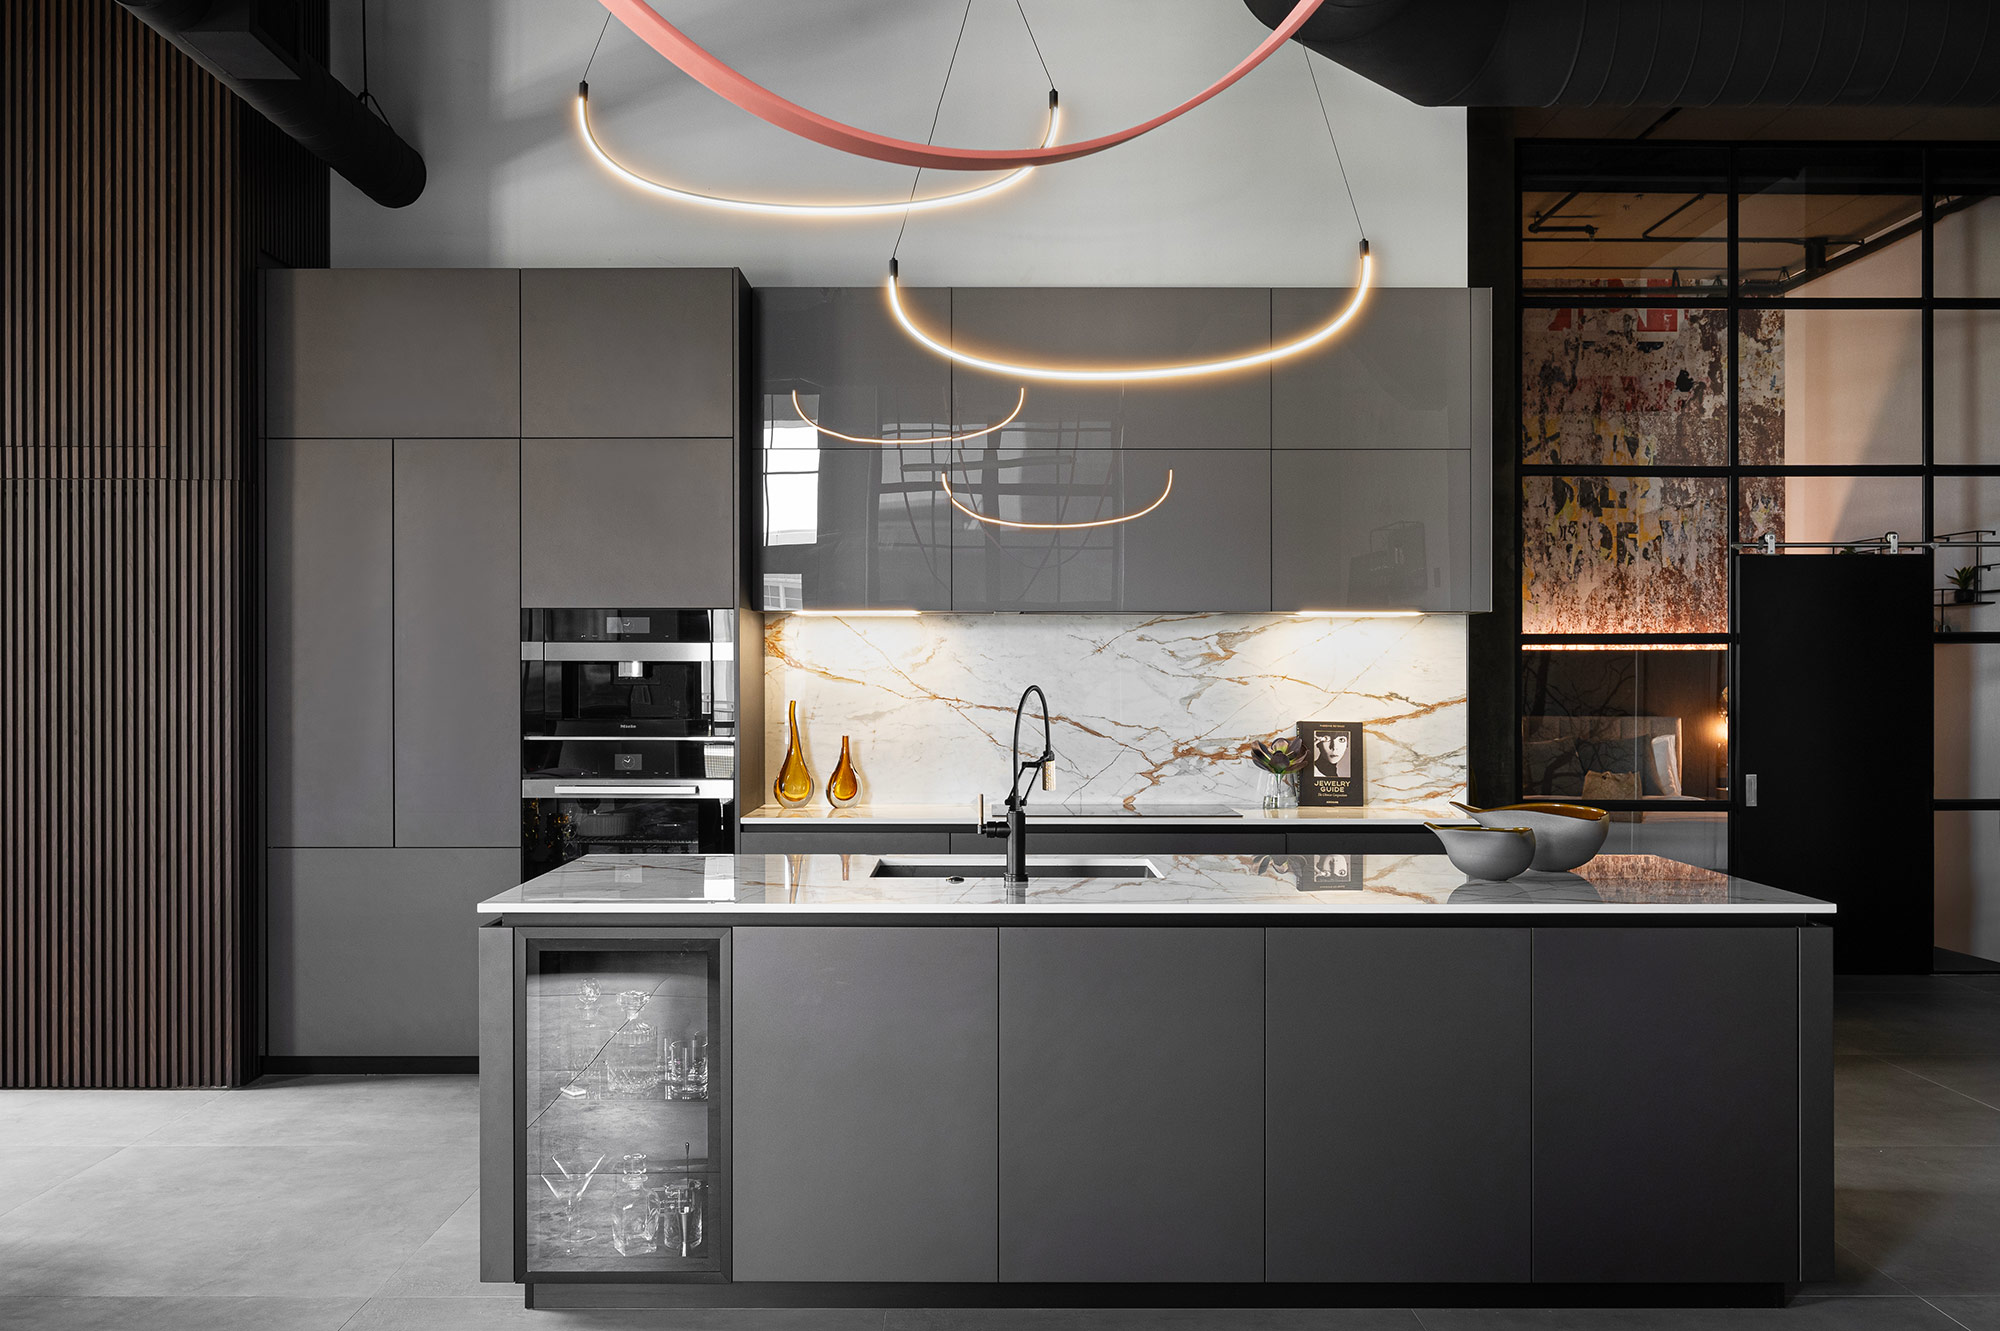 Image of Alessandra Saggese 2 in An award-winning interior design project finished with Dekton Kelya - Cosentino